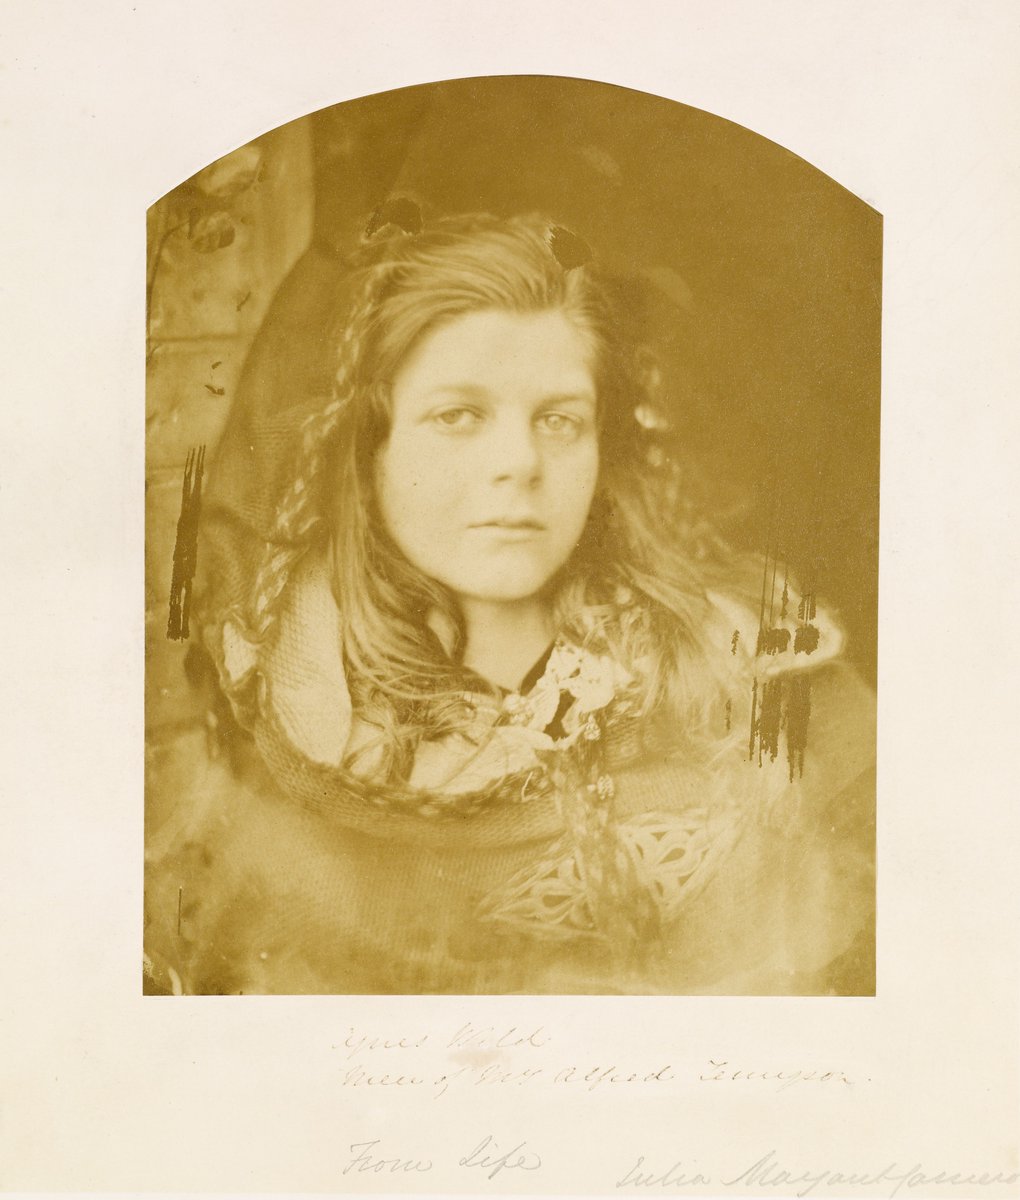 Agnes Weld photographed by Julia Margaret Cameron, 1864. Shared for @artukdotorg's #OnlineArtExchange women in photography theme to celebrate @NPGLondon's exhibition ‘Francesca Woodman and Julia Margaret Cameron: Portraits to Dream In’. dams.birminghammuseums.org.uk/asset-bank/act… #PublicDomain #CC0